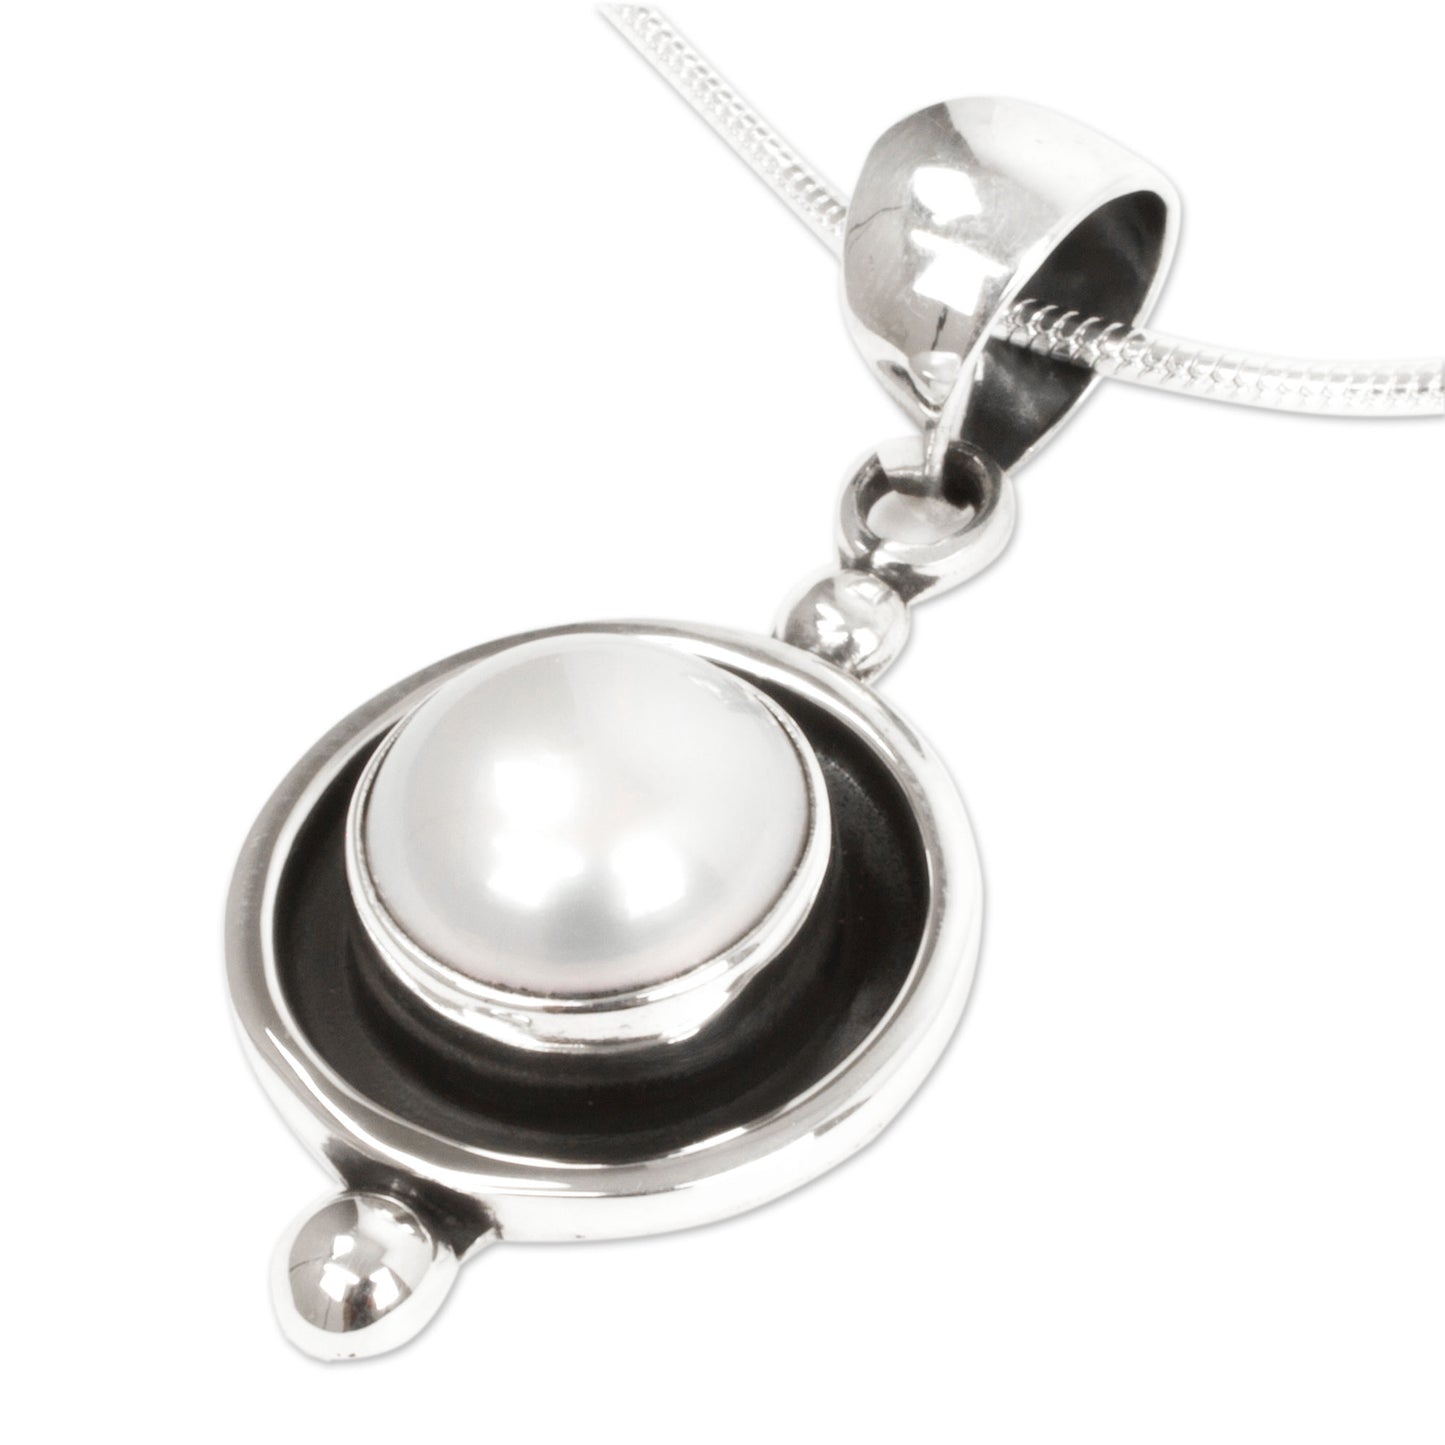 Lunar Shadow Taxco Jewelry Necklace Pearl and Sterling Silver